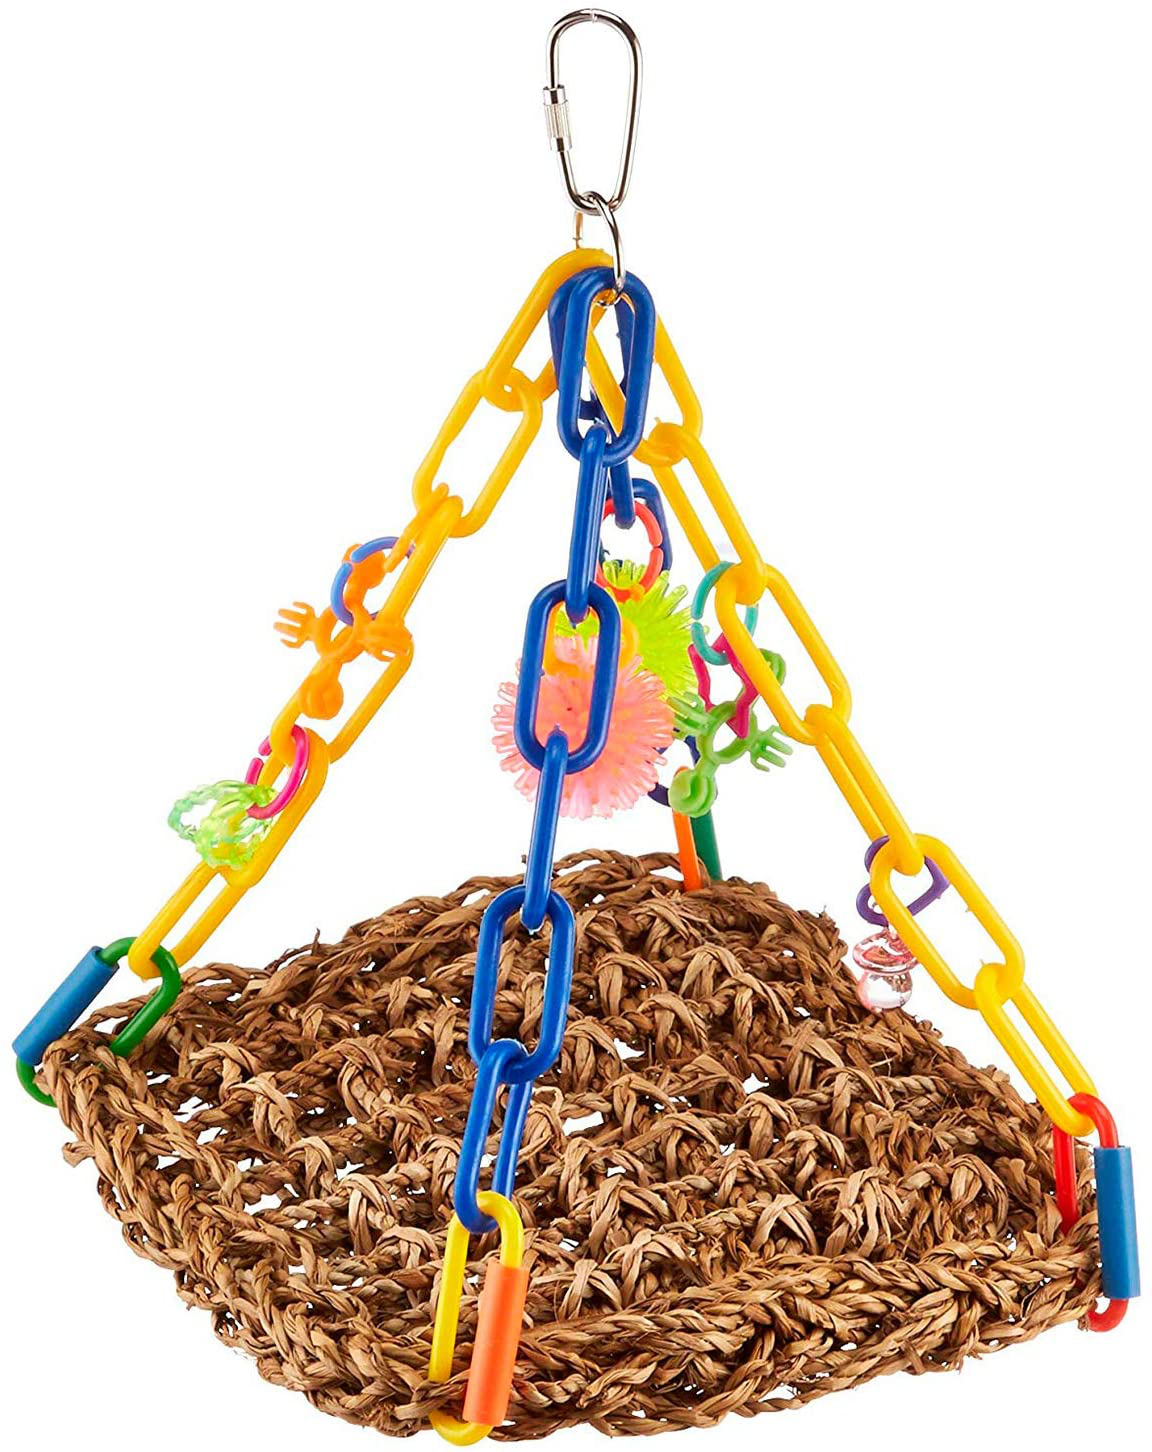 Super Bird Creations SB747 Bright Colorful Mini Flying Trapeze Chewable Bird Toy, Small Size, 6” X 7” X 9”